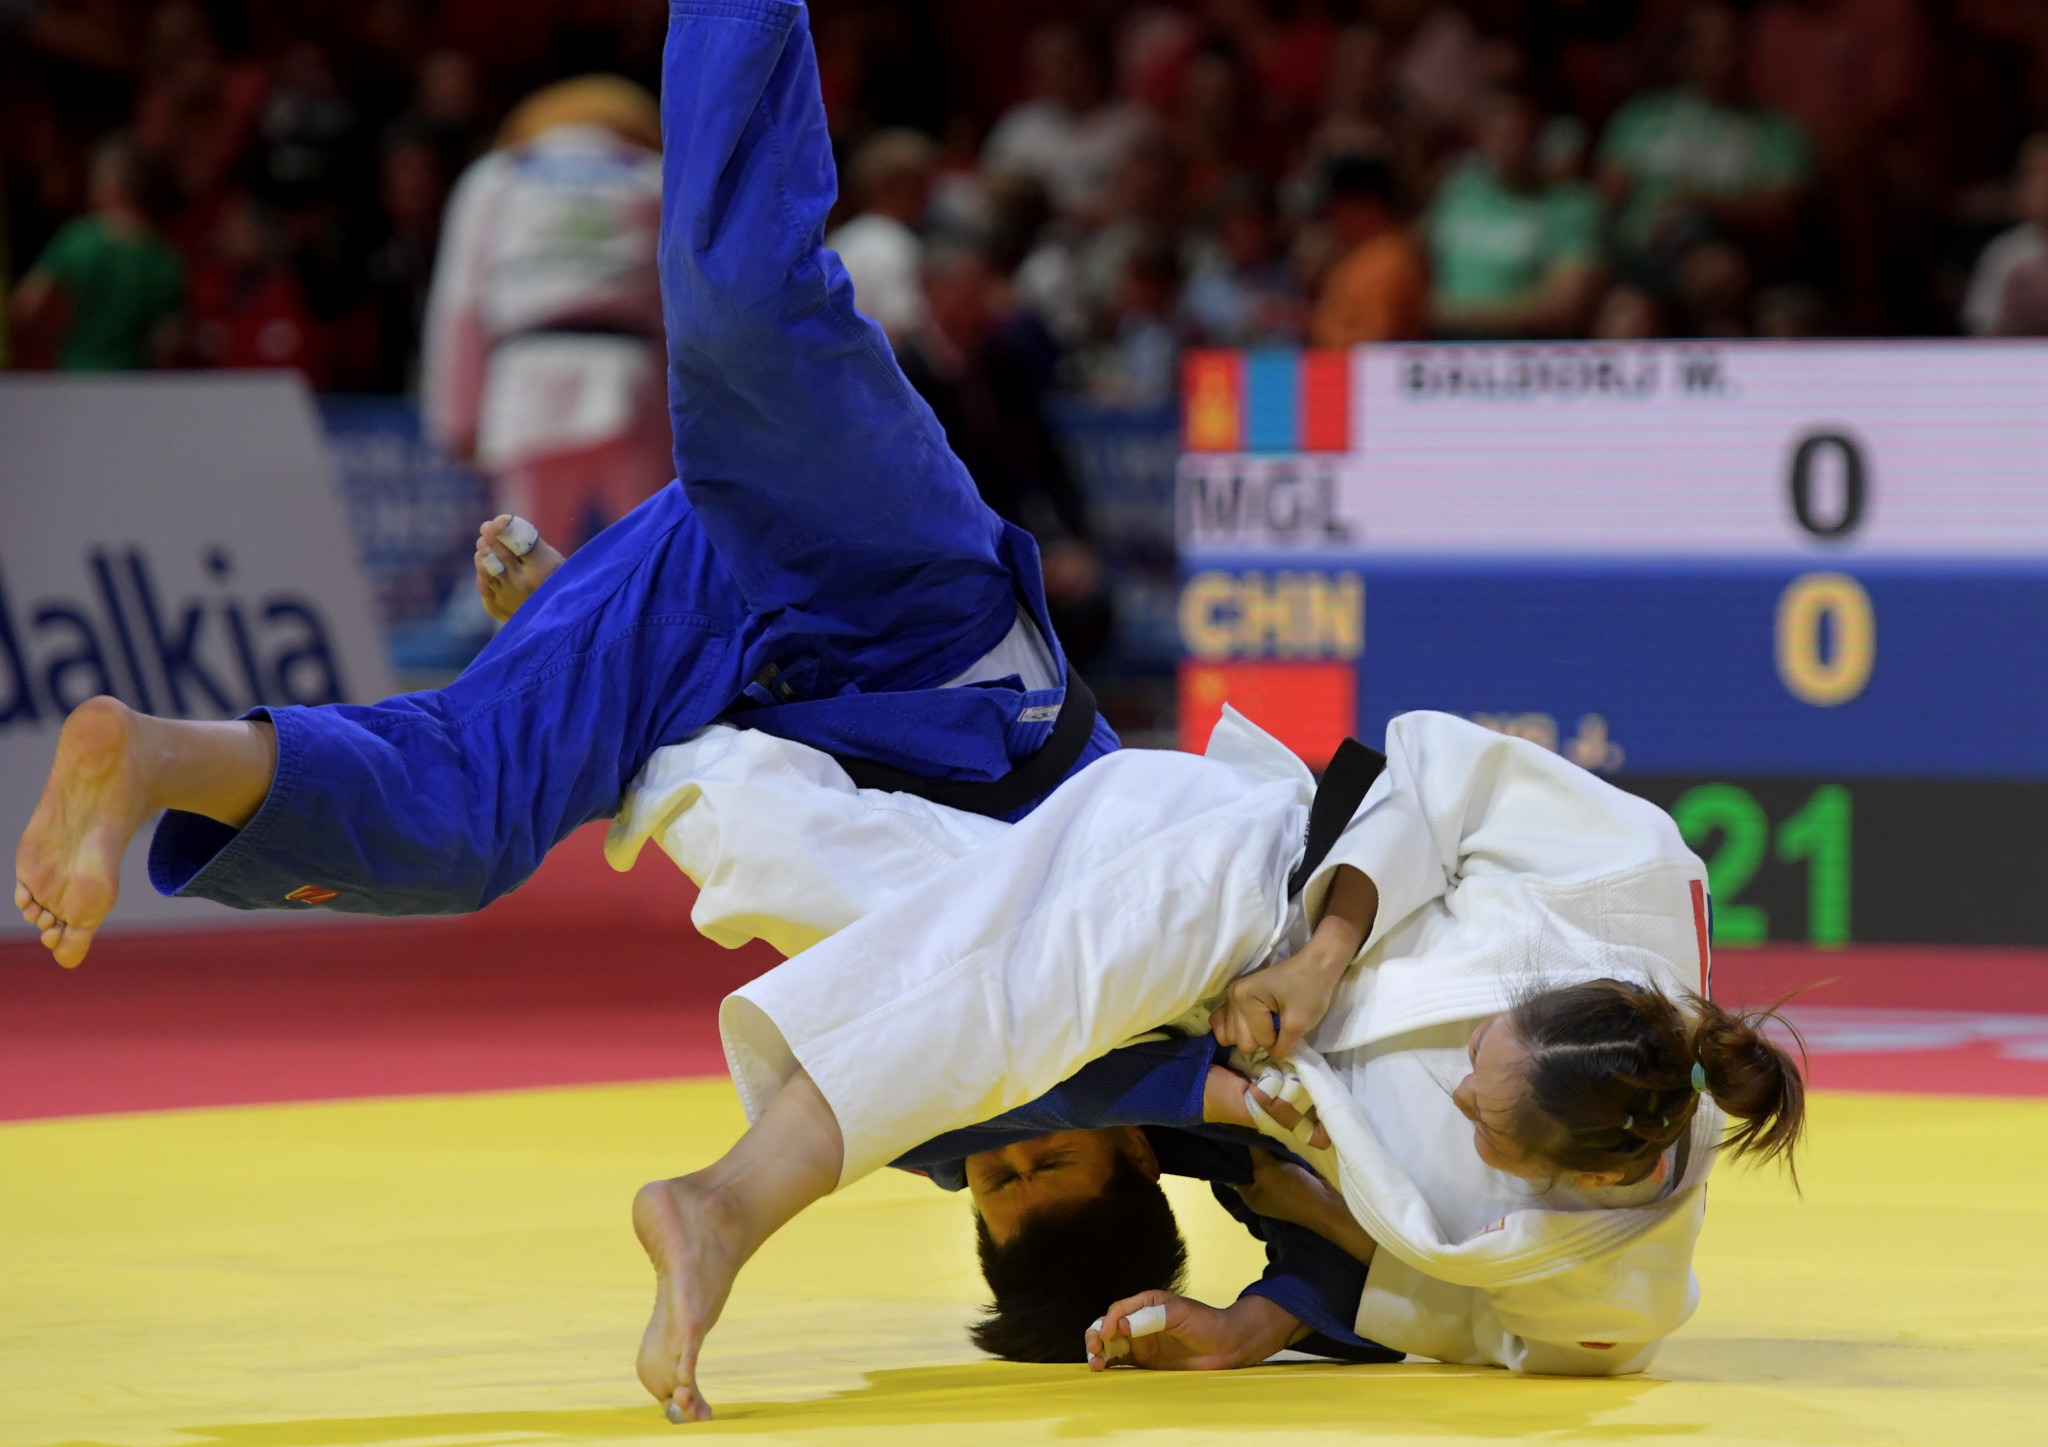 Mungunchimeg Baldorj clinched Mongolia's fifth medal of the Championships ©Getty Images